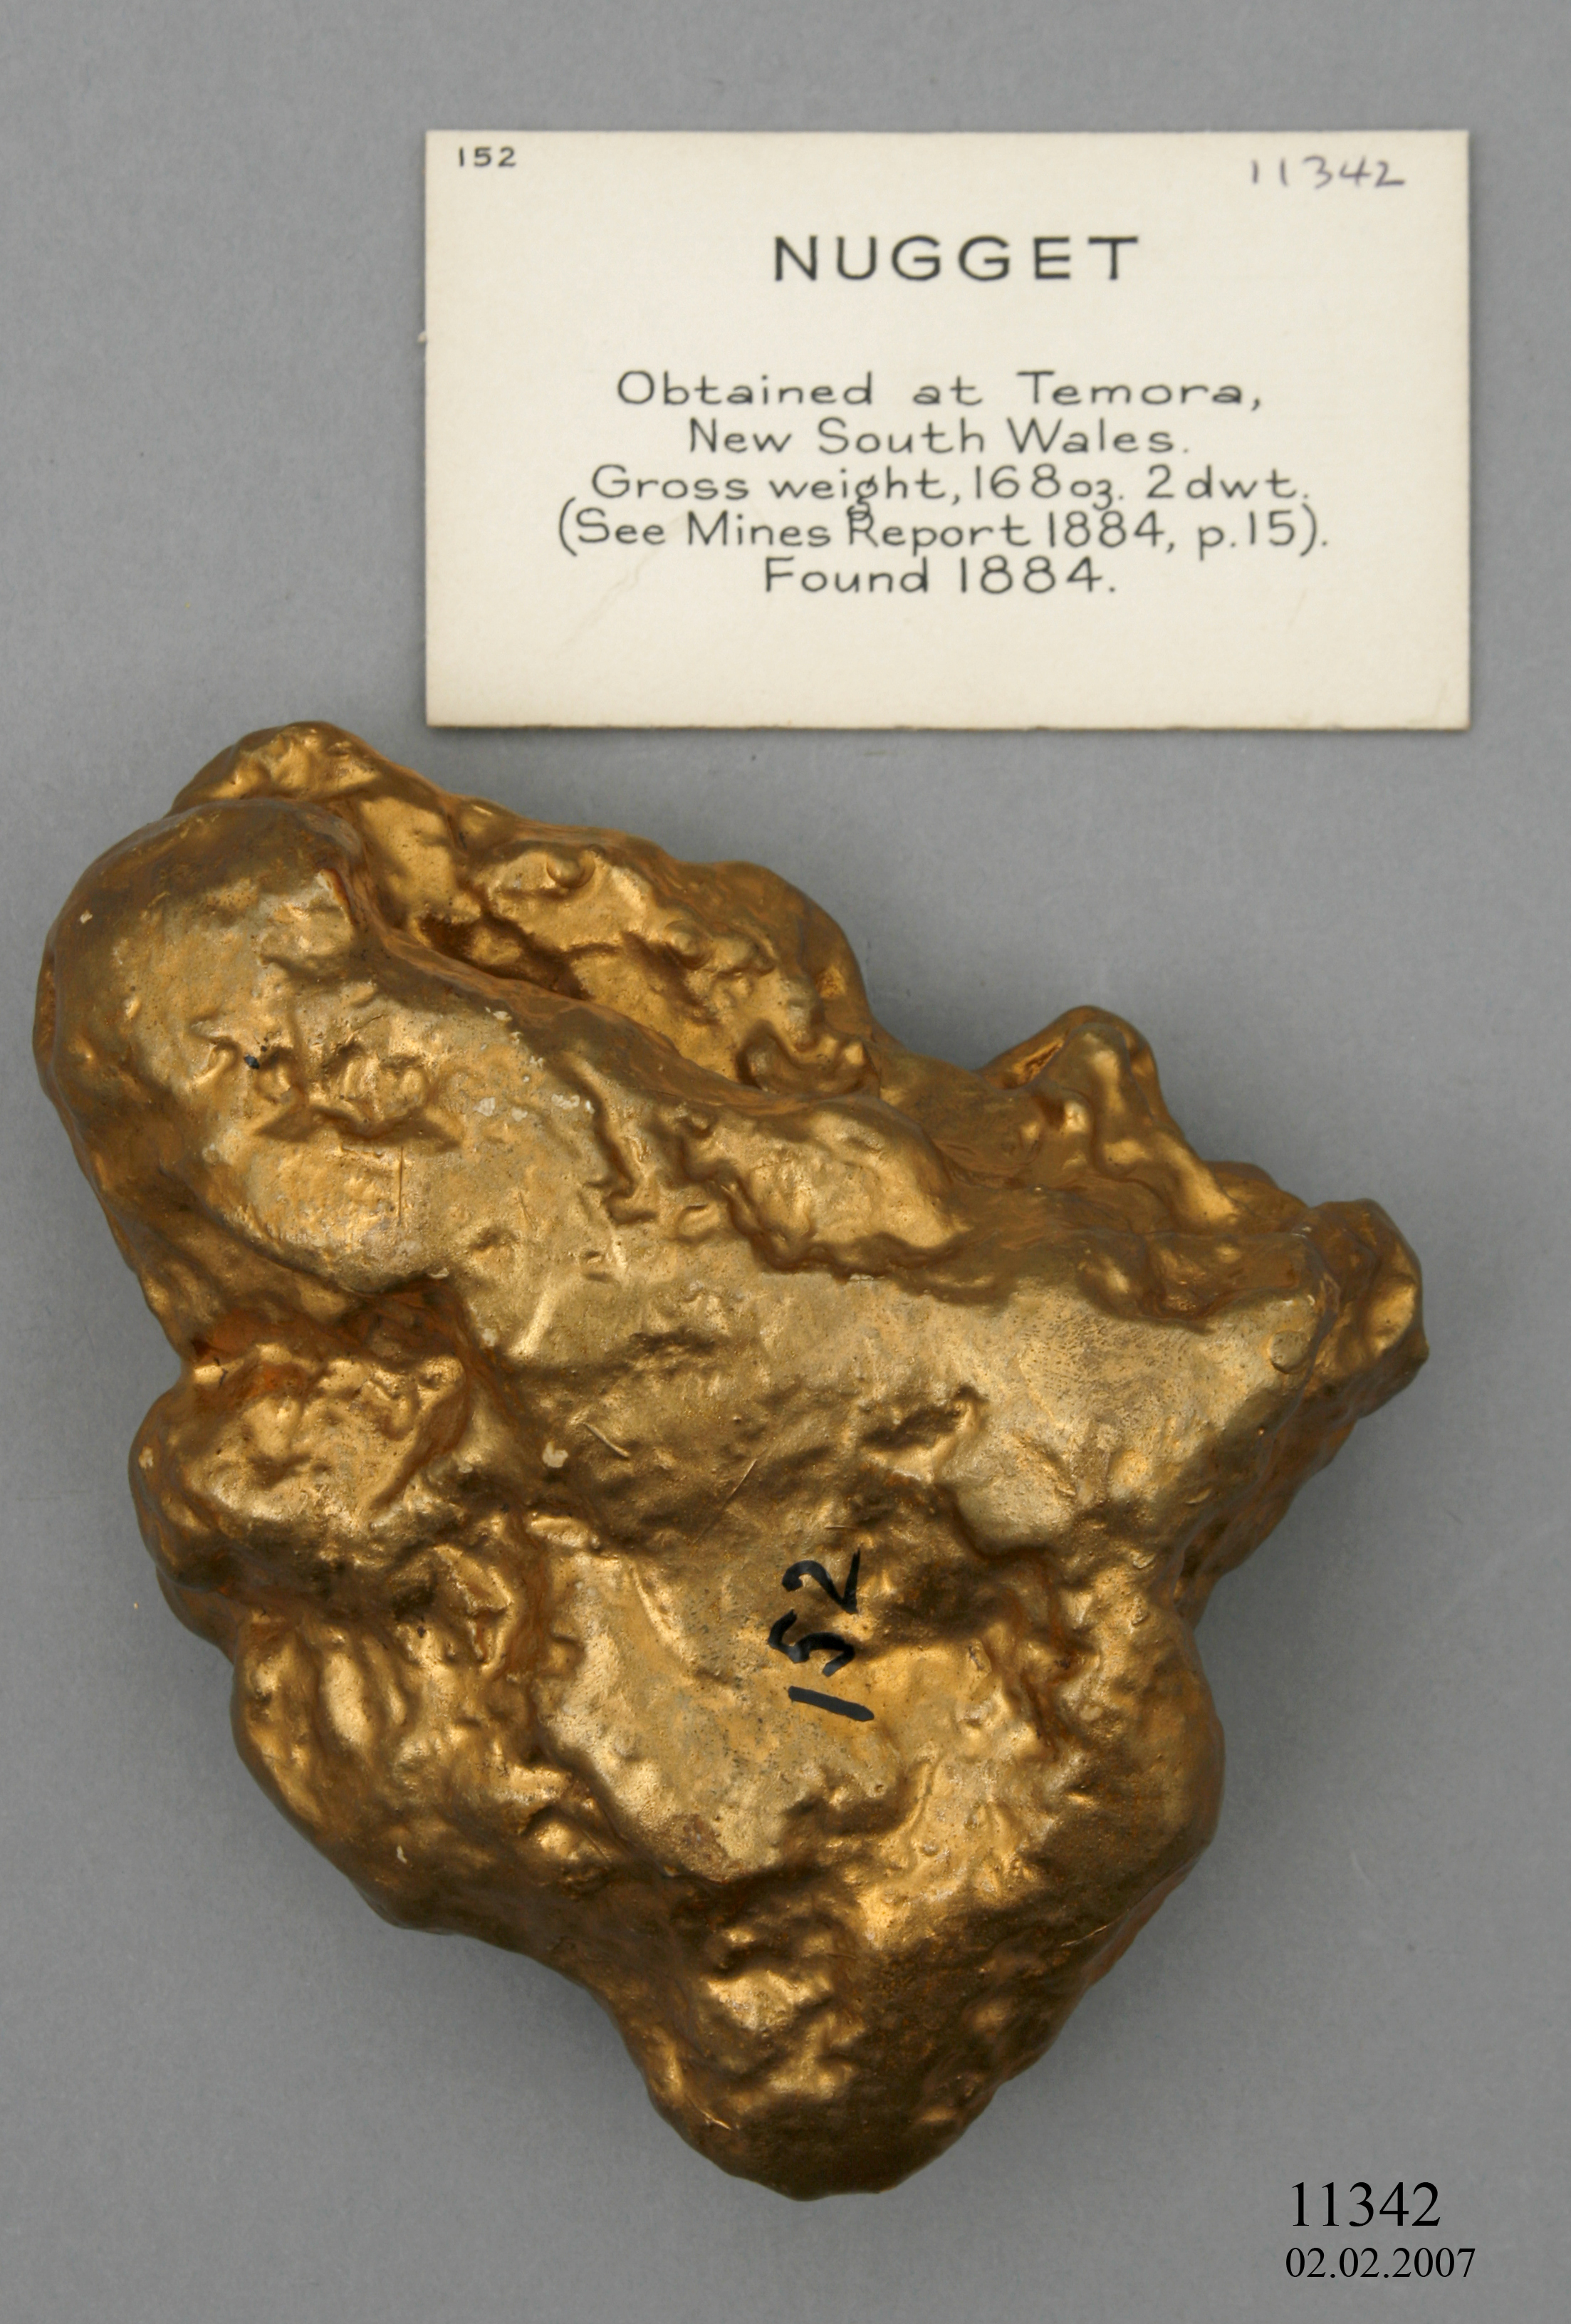 Model of a gold nugget discovered in New South Wales in 1884